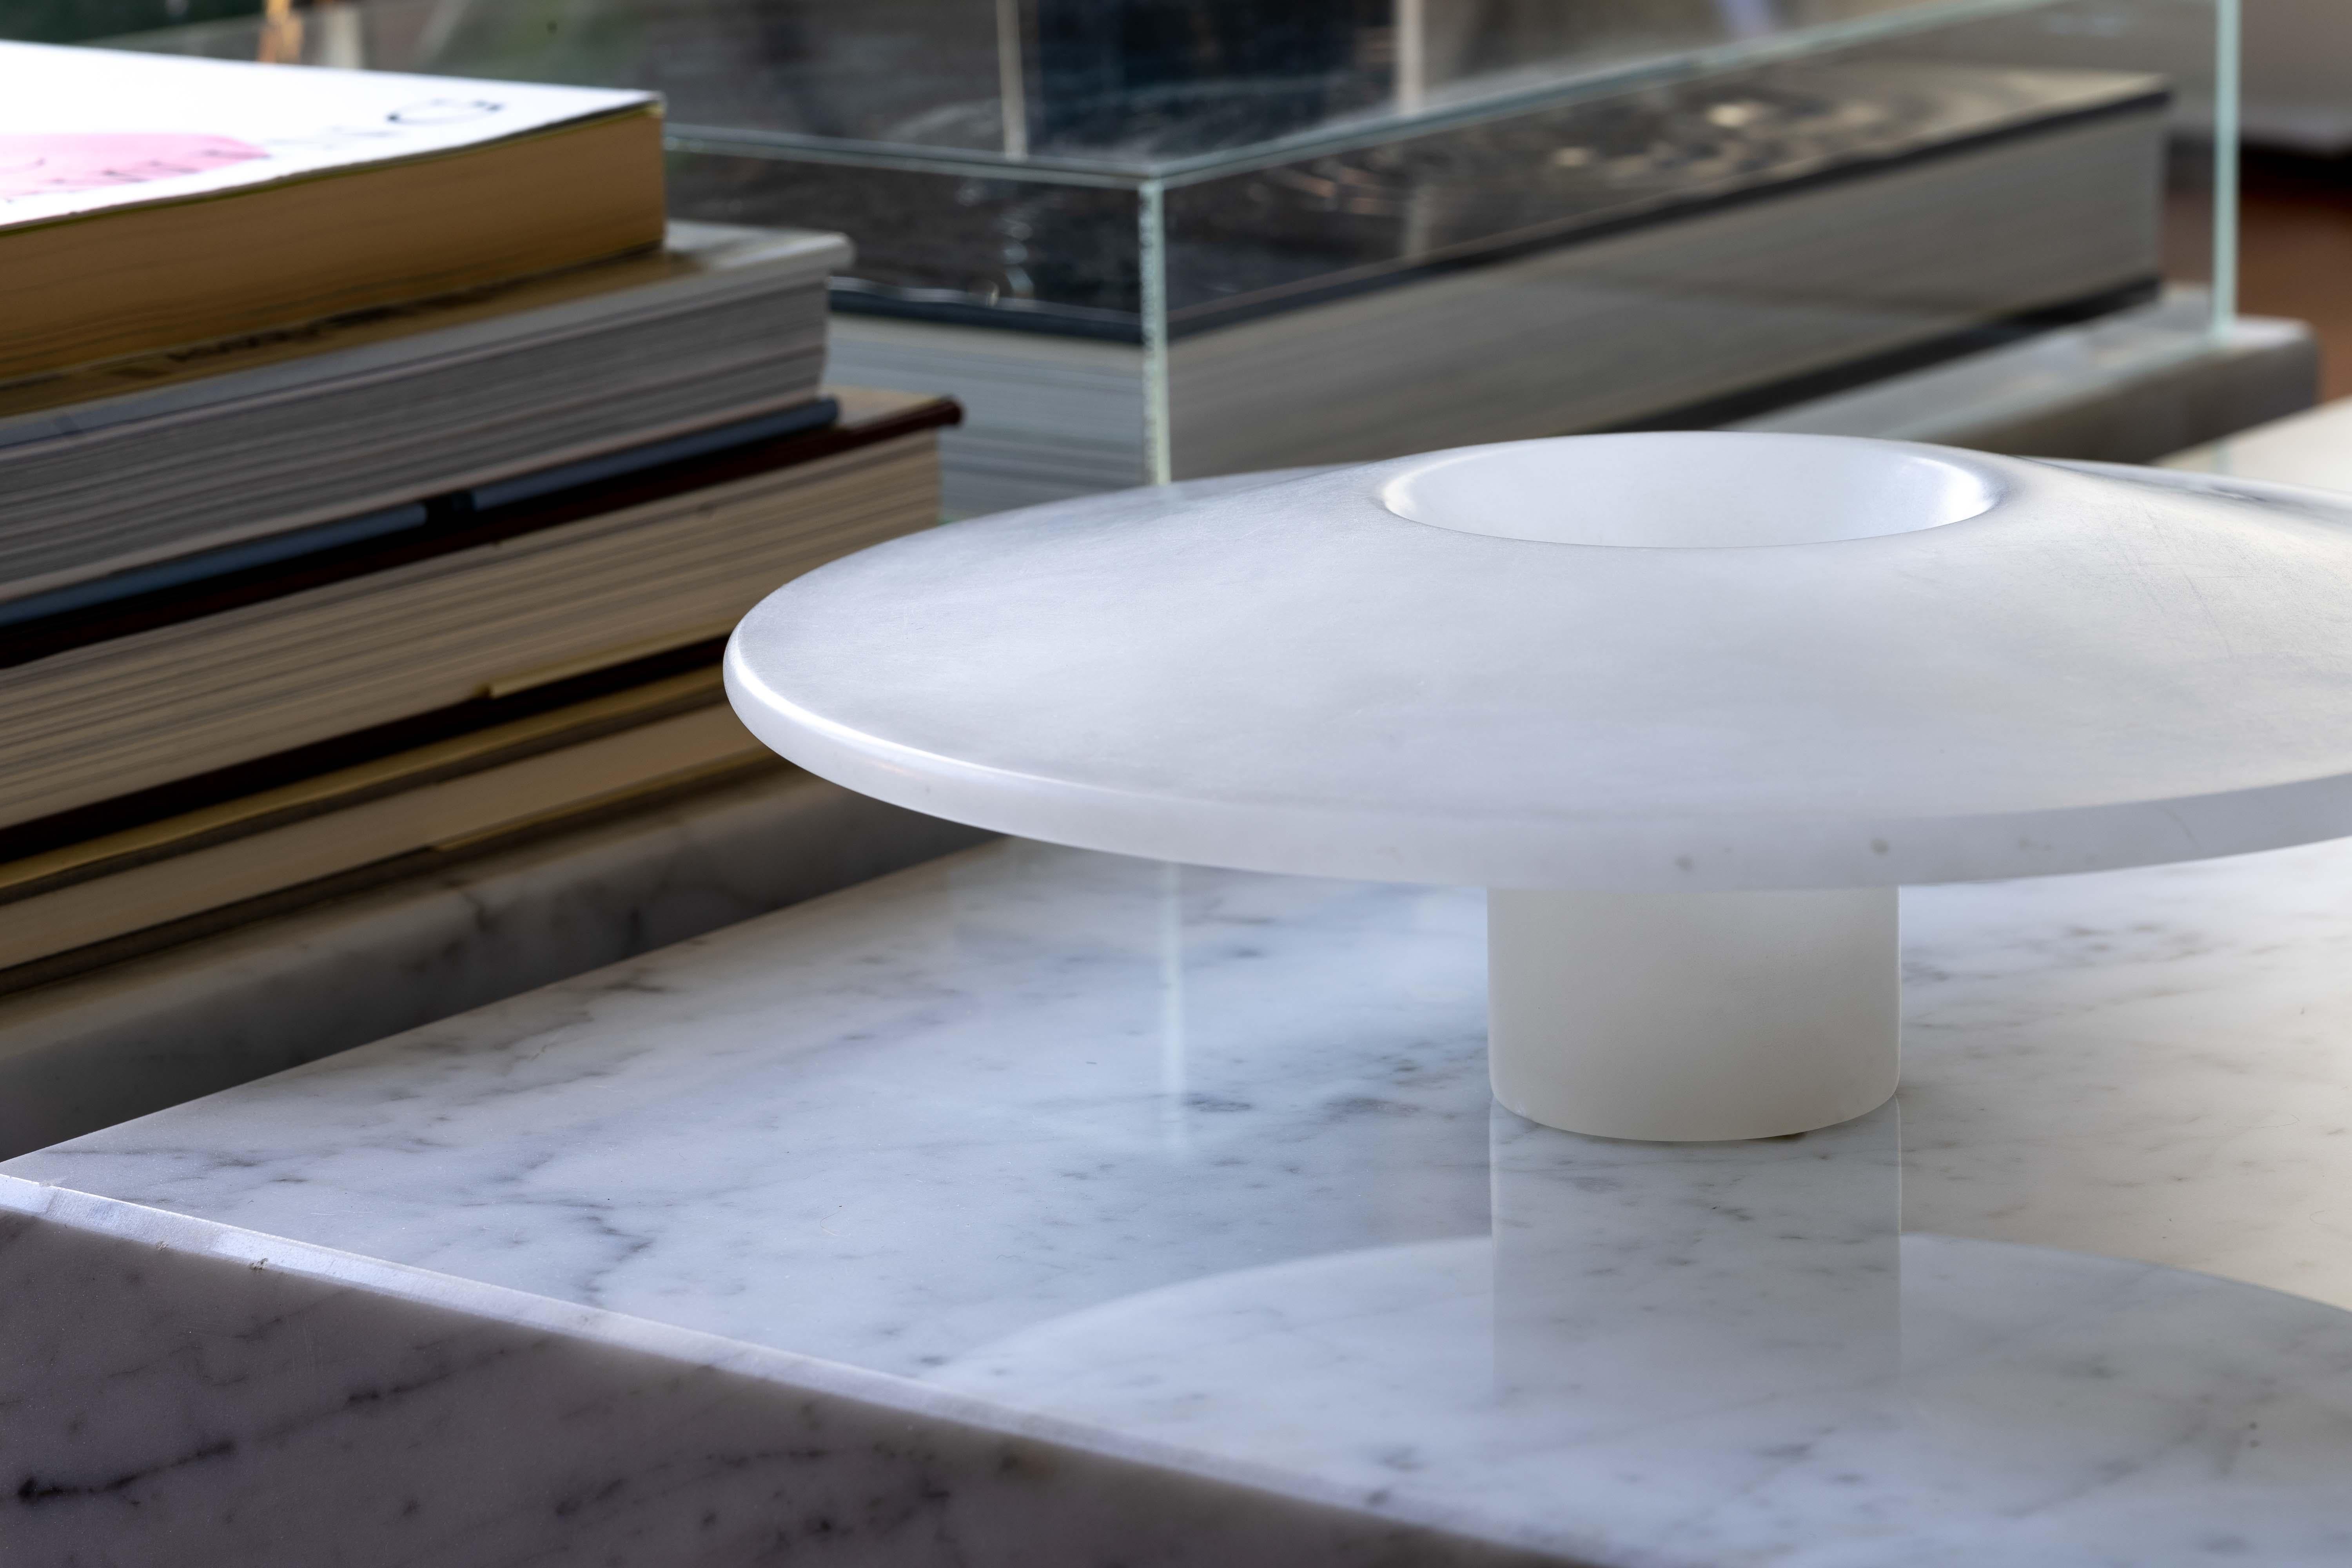 A low turned form designed by Angelo Mangiarotti as part of a collection of objects for the Società Cooperativa Artieri dell'Alabastro in Volterra that were intended to revive interest in alabaster as a material. This centerpiece sits upon a single